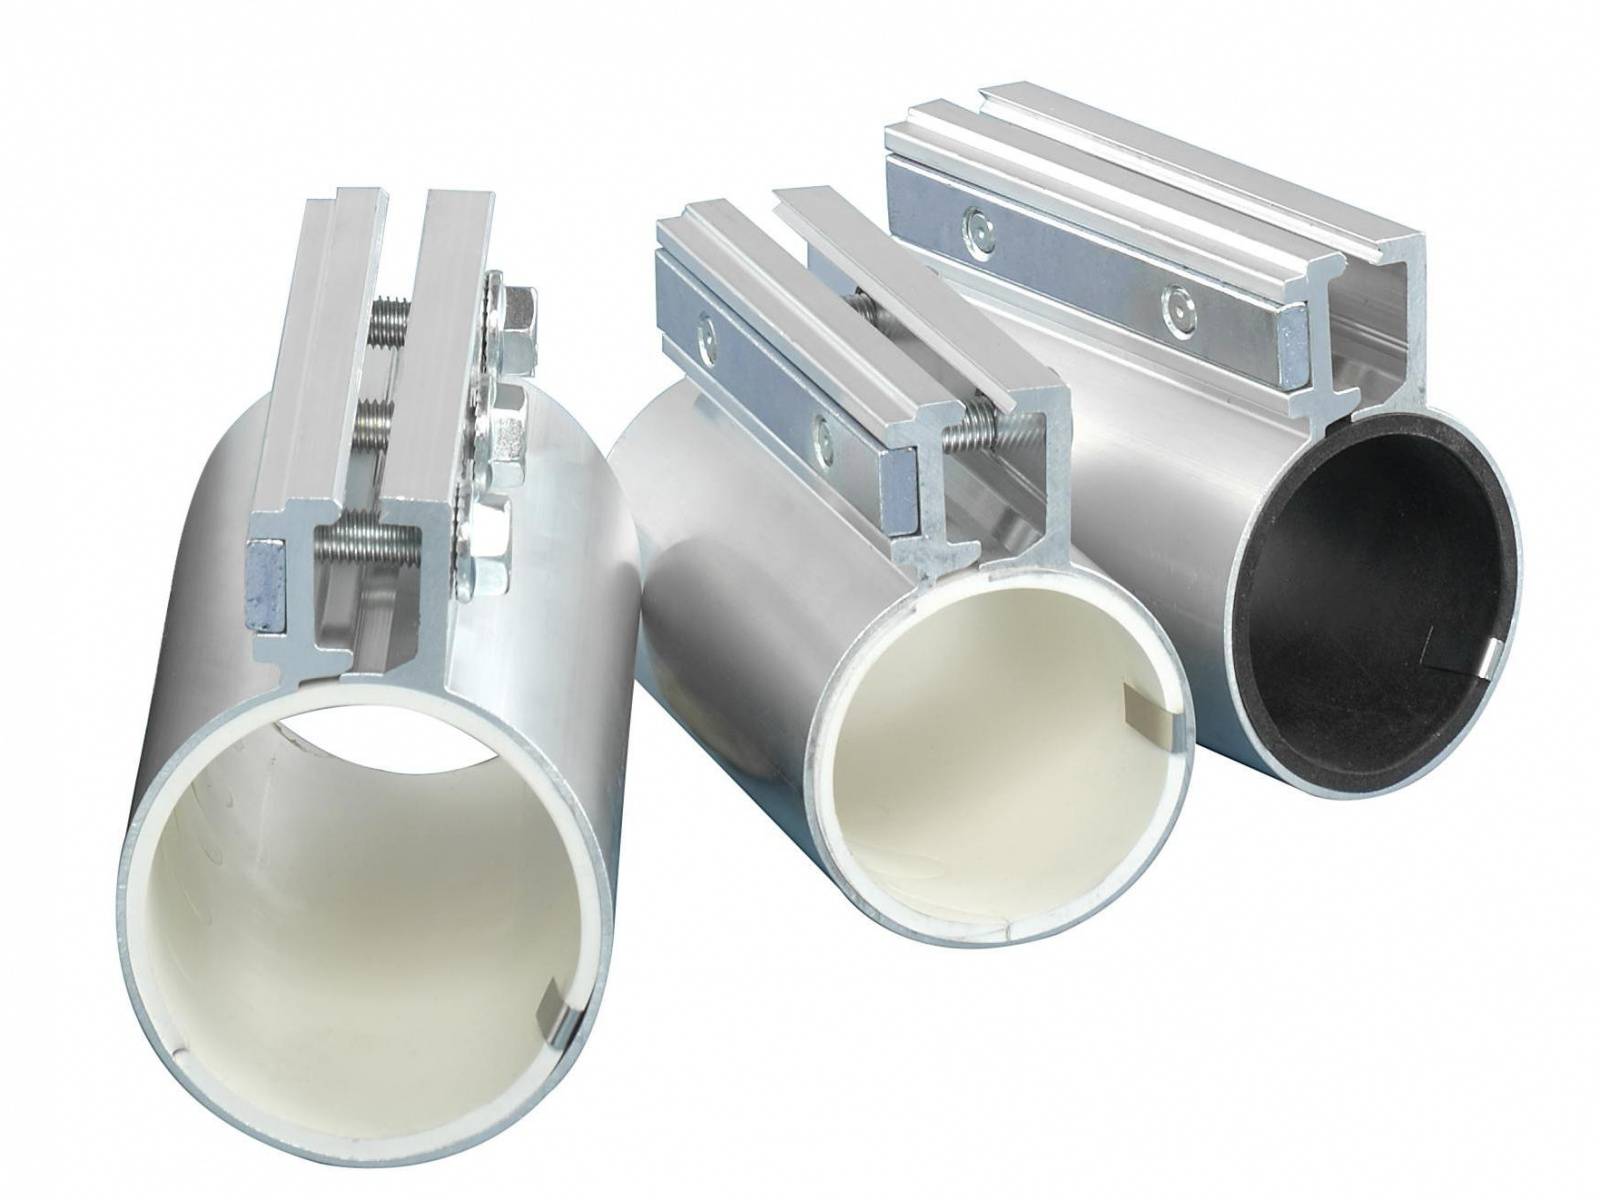 DVK 6 - pipe couplings for suction conveying (light version)